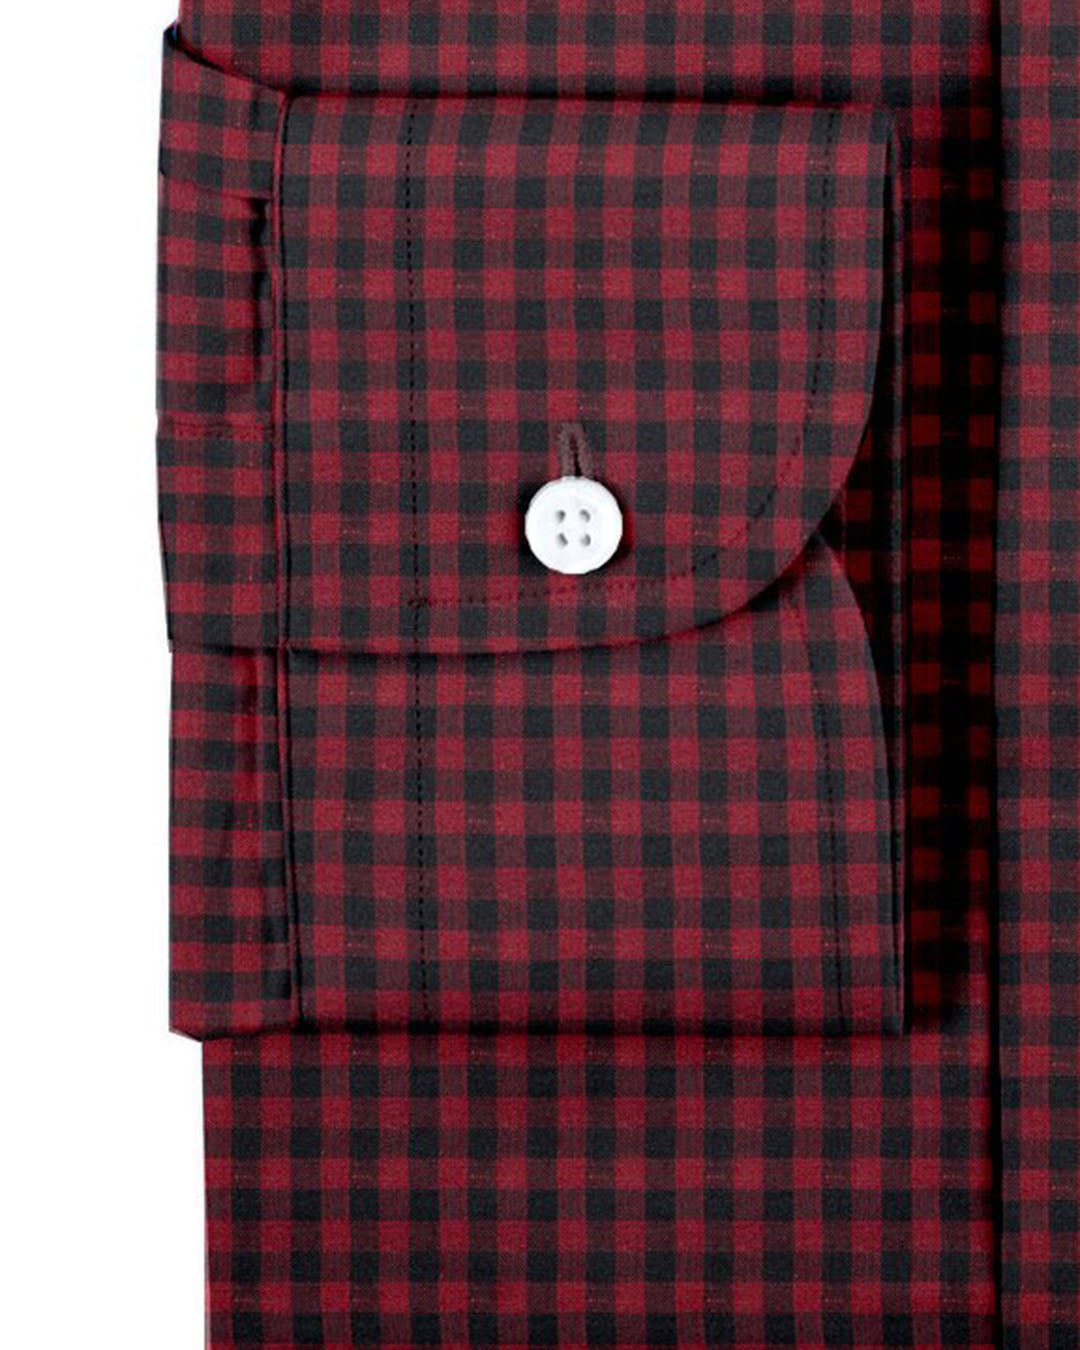 Cuff of custom linen shirt for men in red and black checks by Luxire Clothing